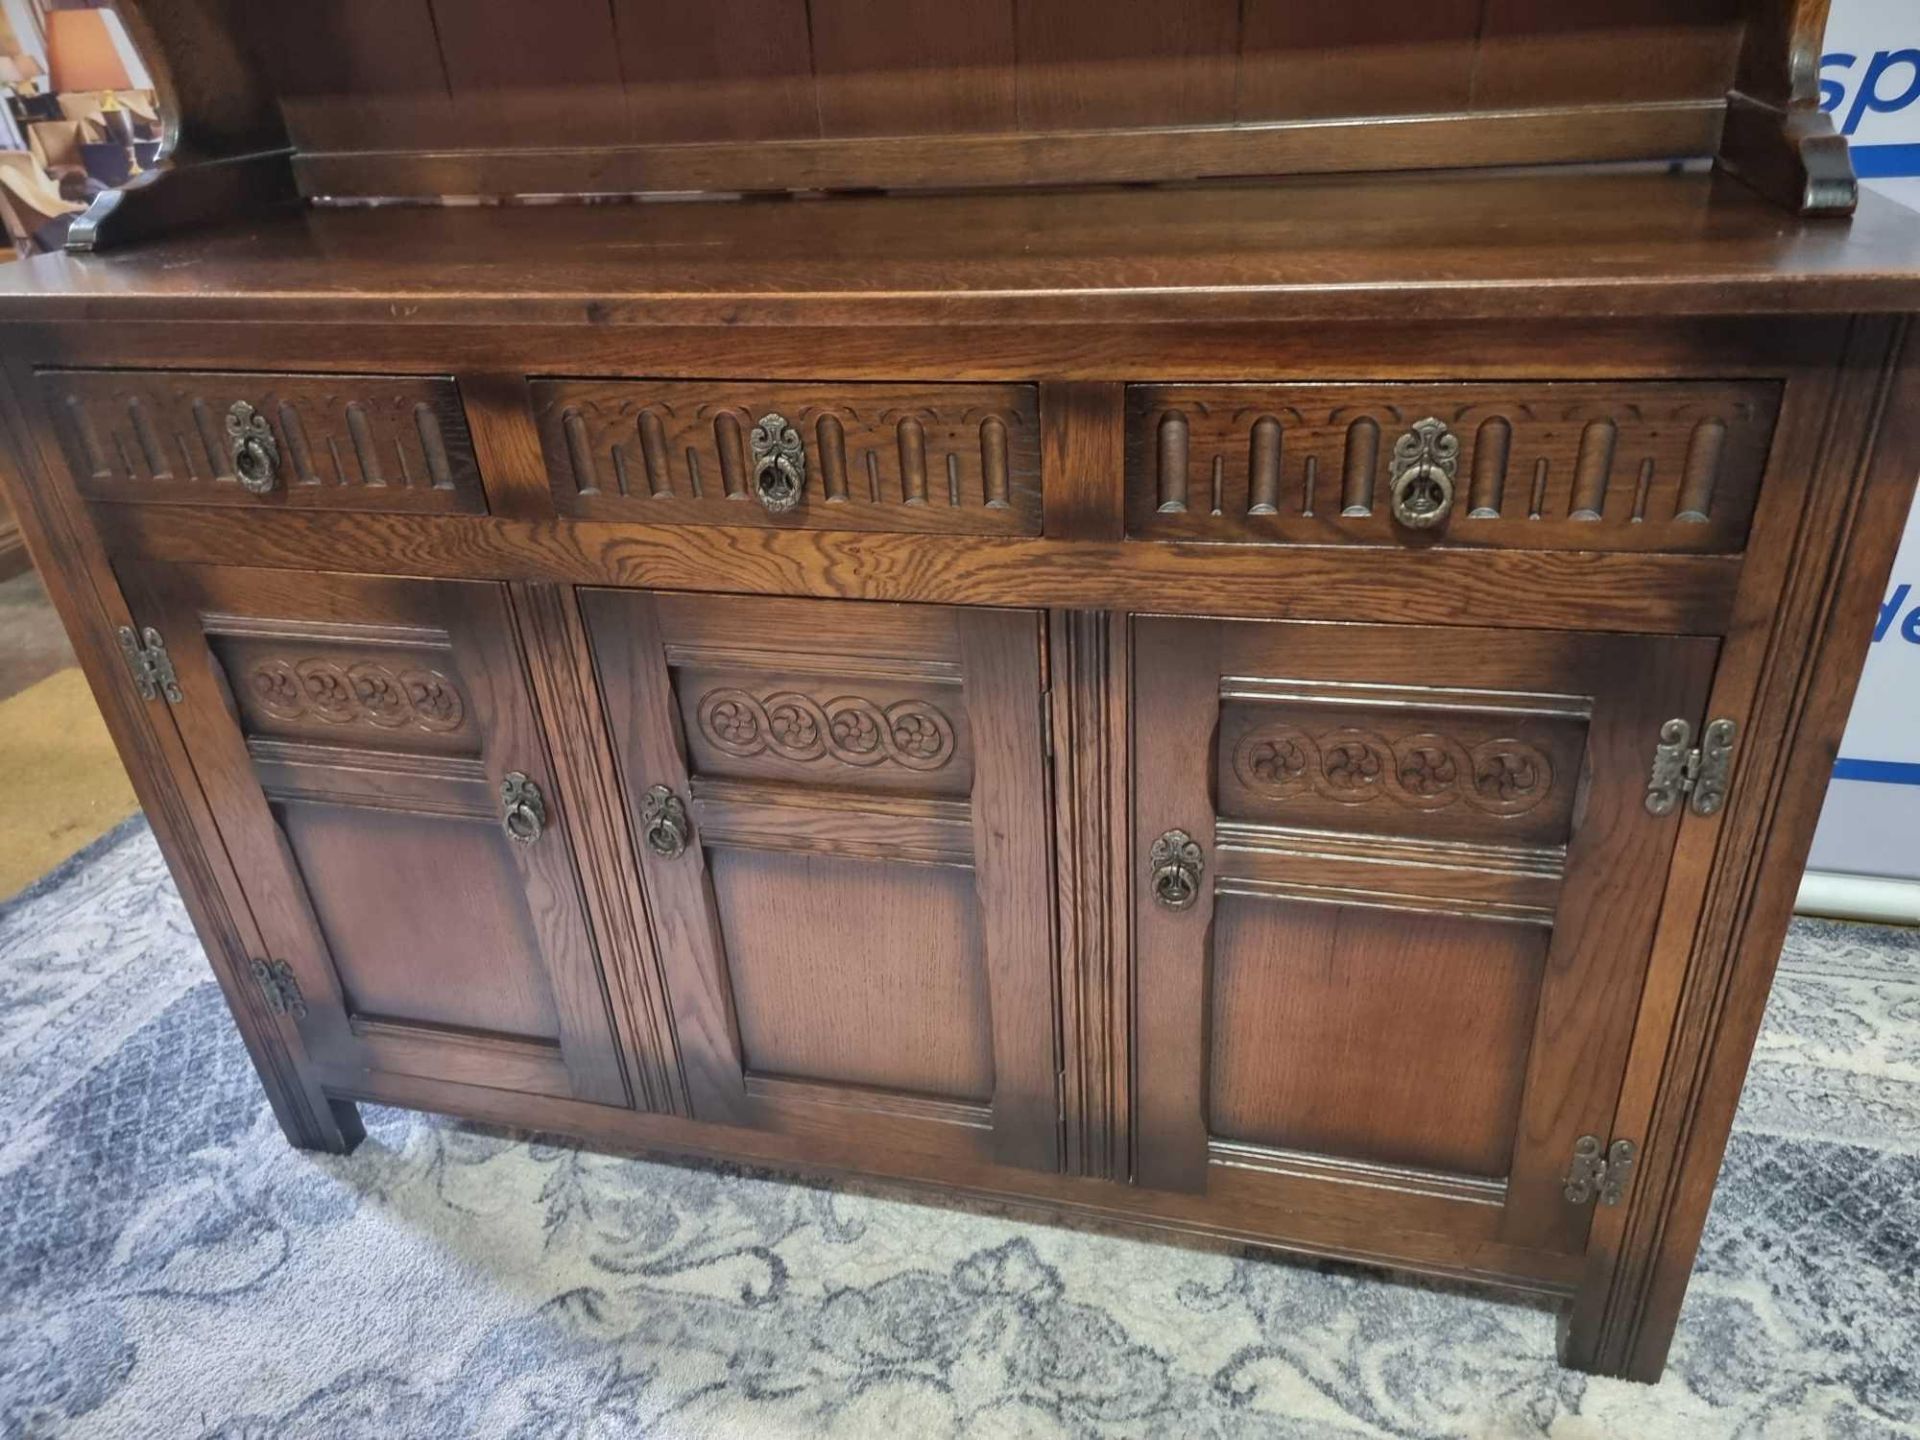 Wood Bros Old Charm Windsor Welsh Dresser The Design Inspiration For Old Charm Comes From The - Bild 6 aus 11